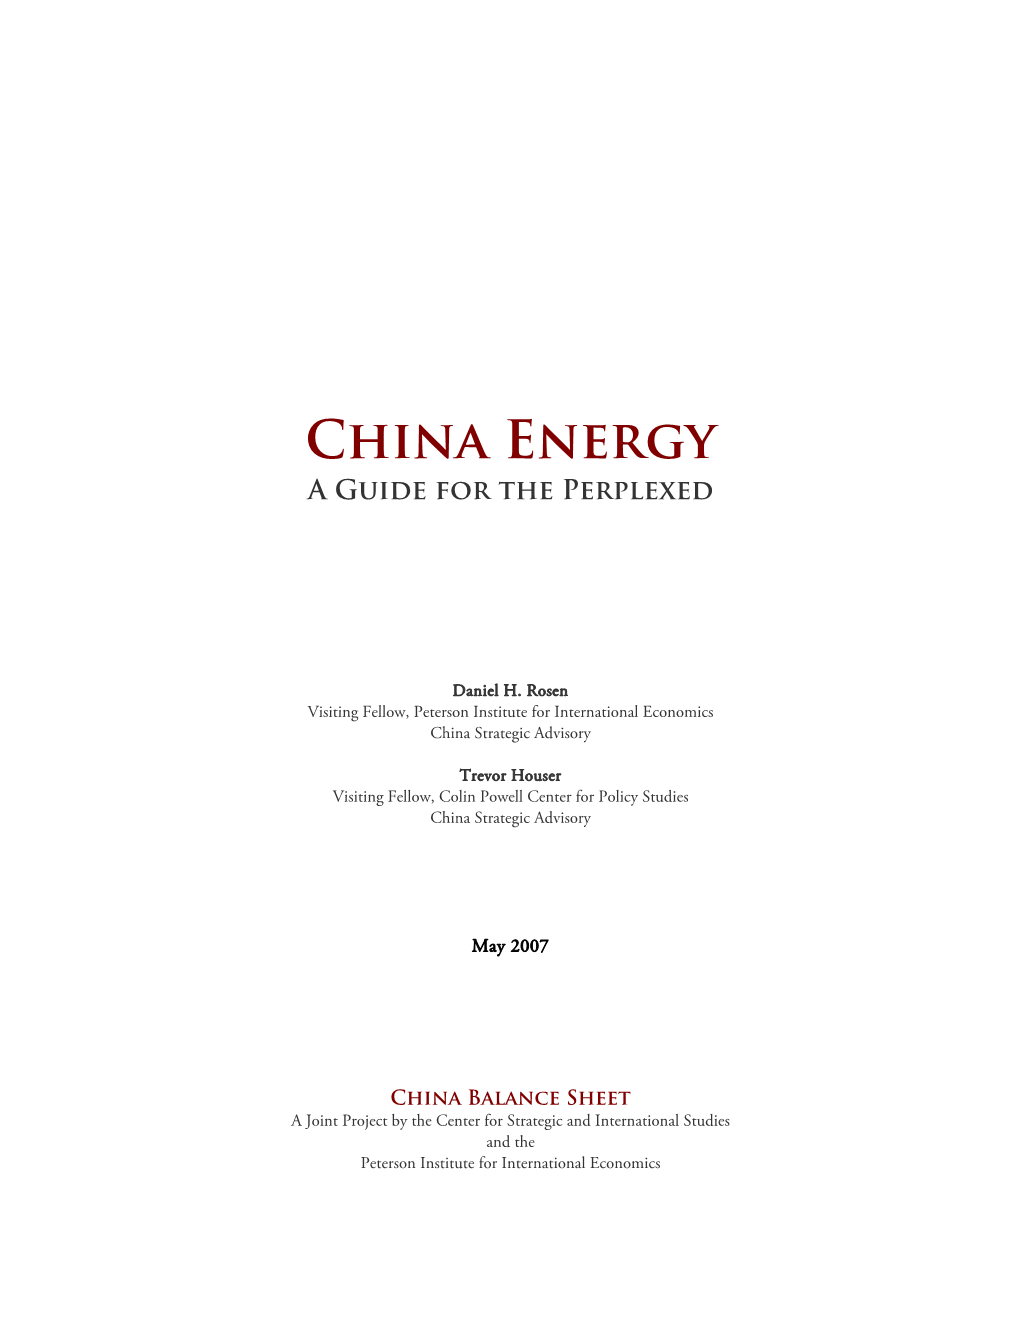 Paper: China Energy: a Guide for the Perplexed